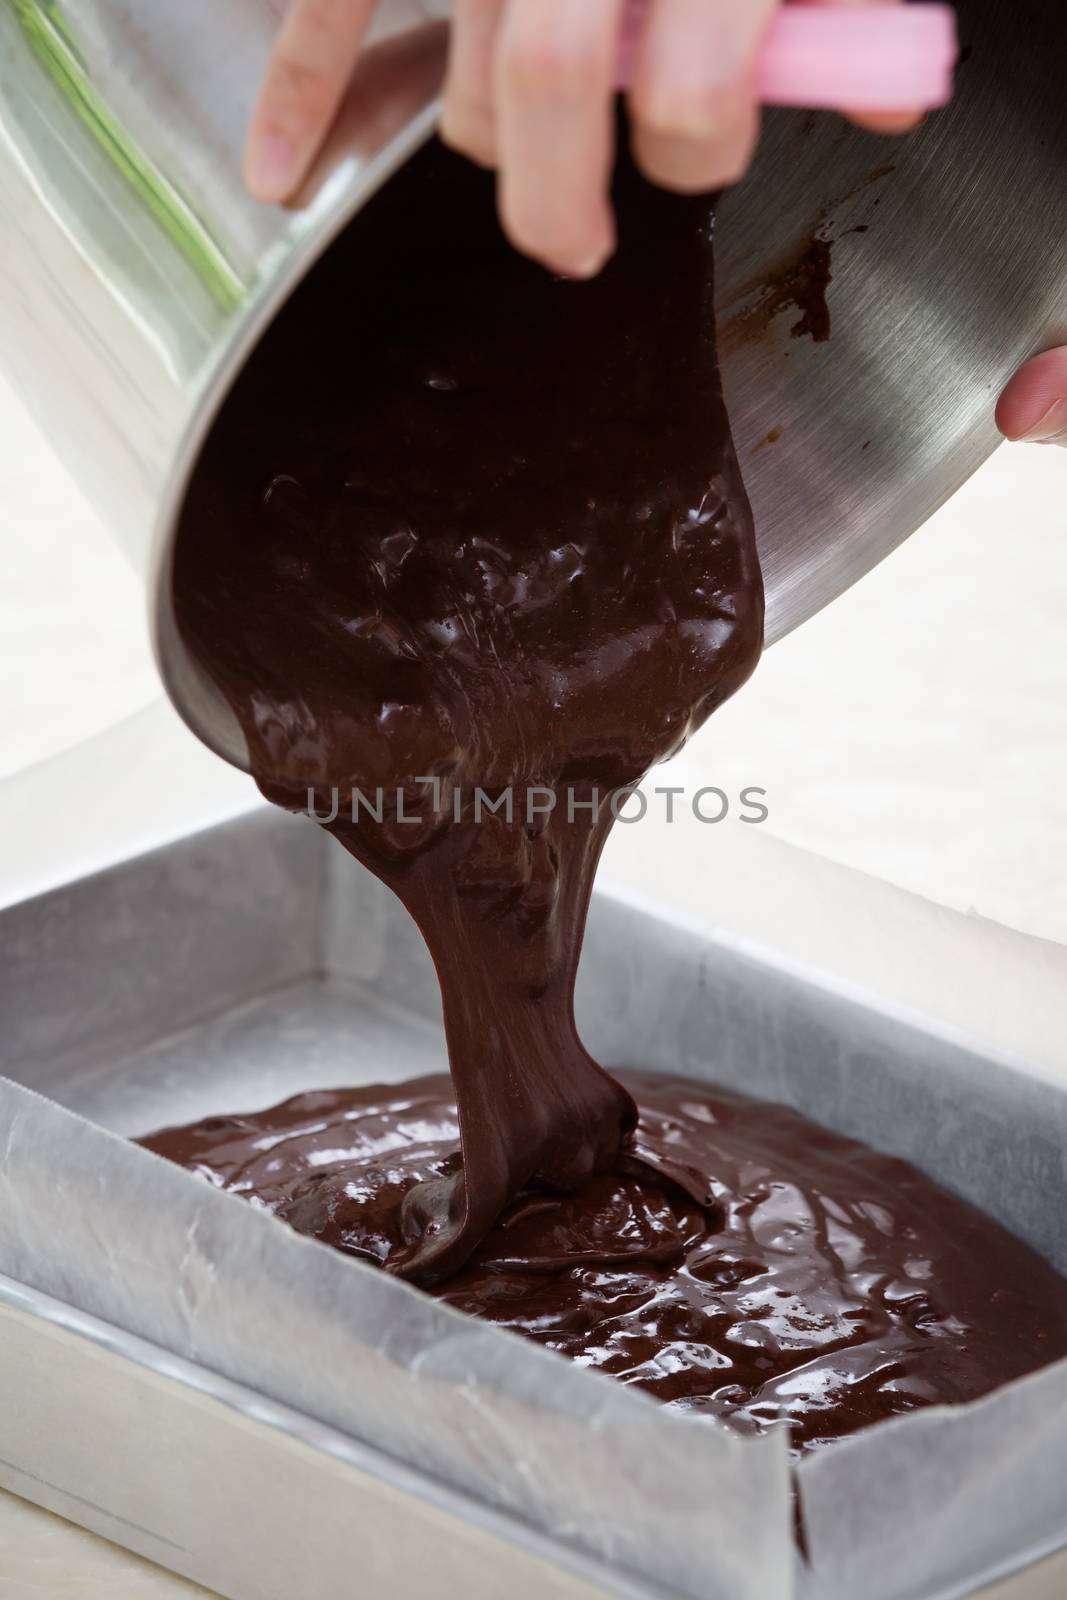 pour brownie to tray